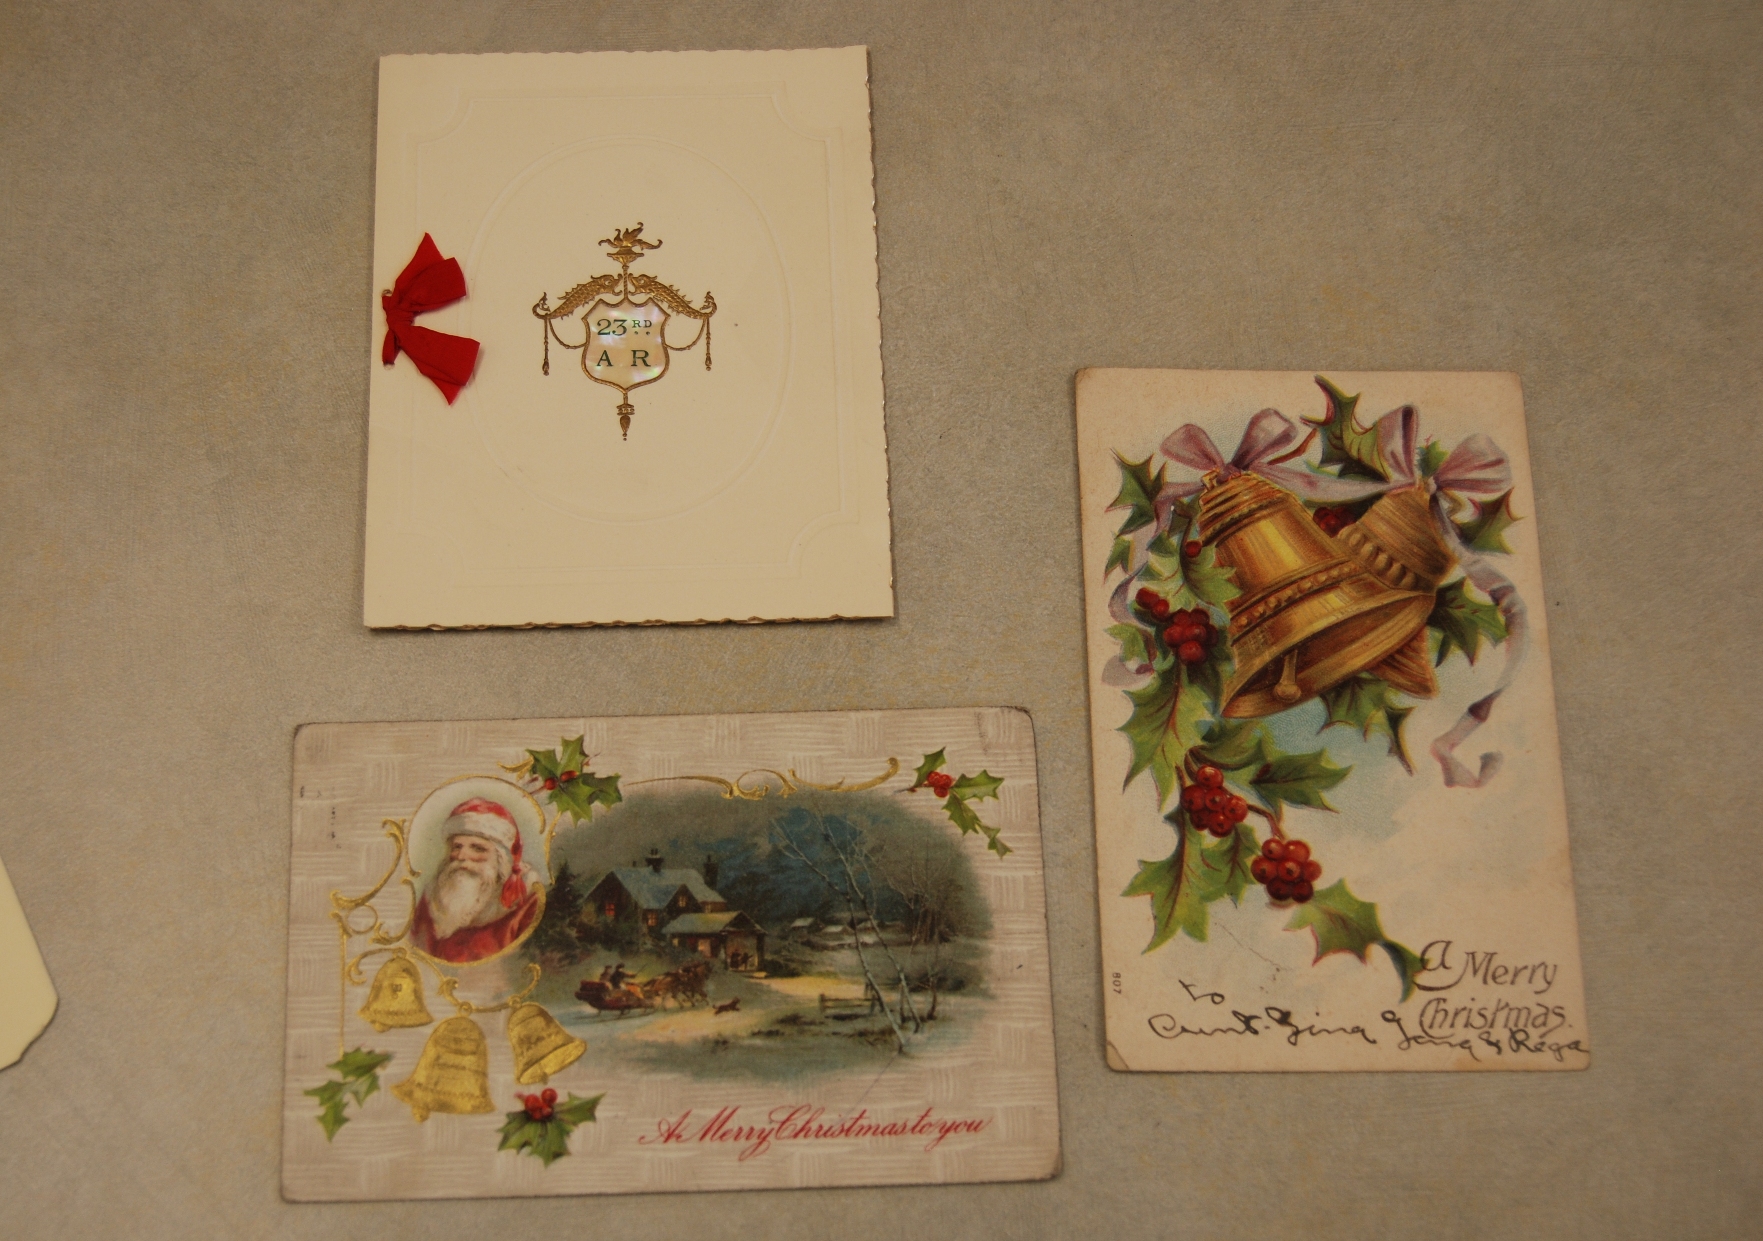 Turn of the century Christmas cards.